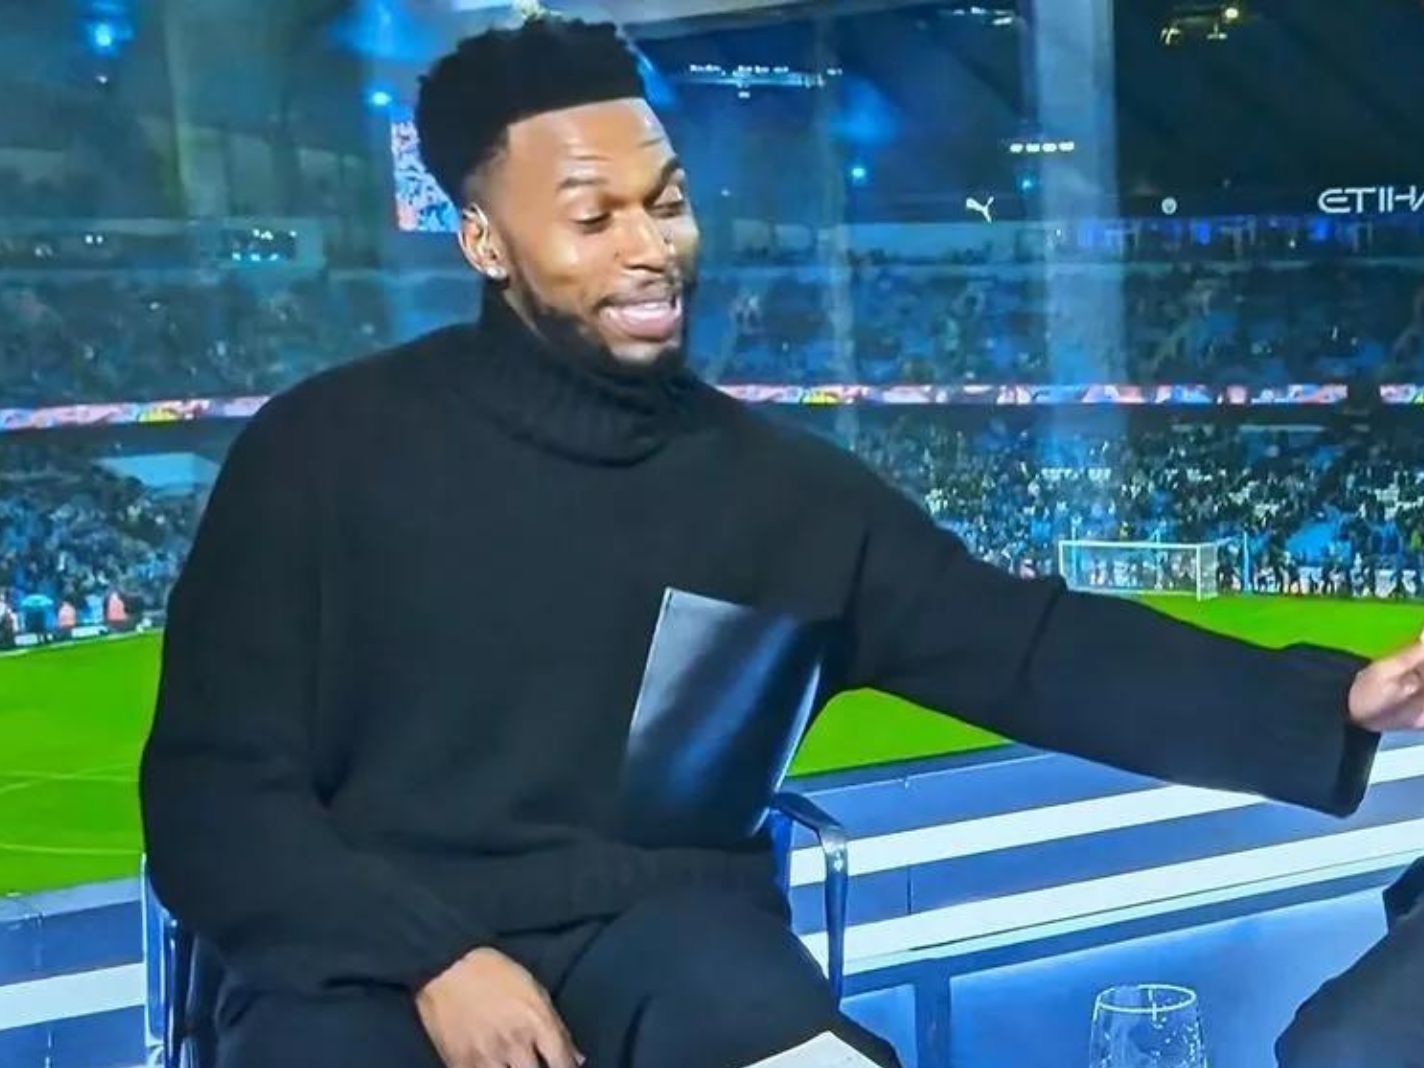 How Much Does Daniel Sturridge’s Jumper with Massive Pocket Cost?